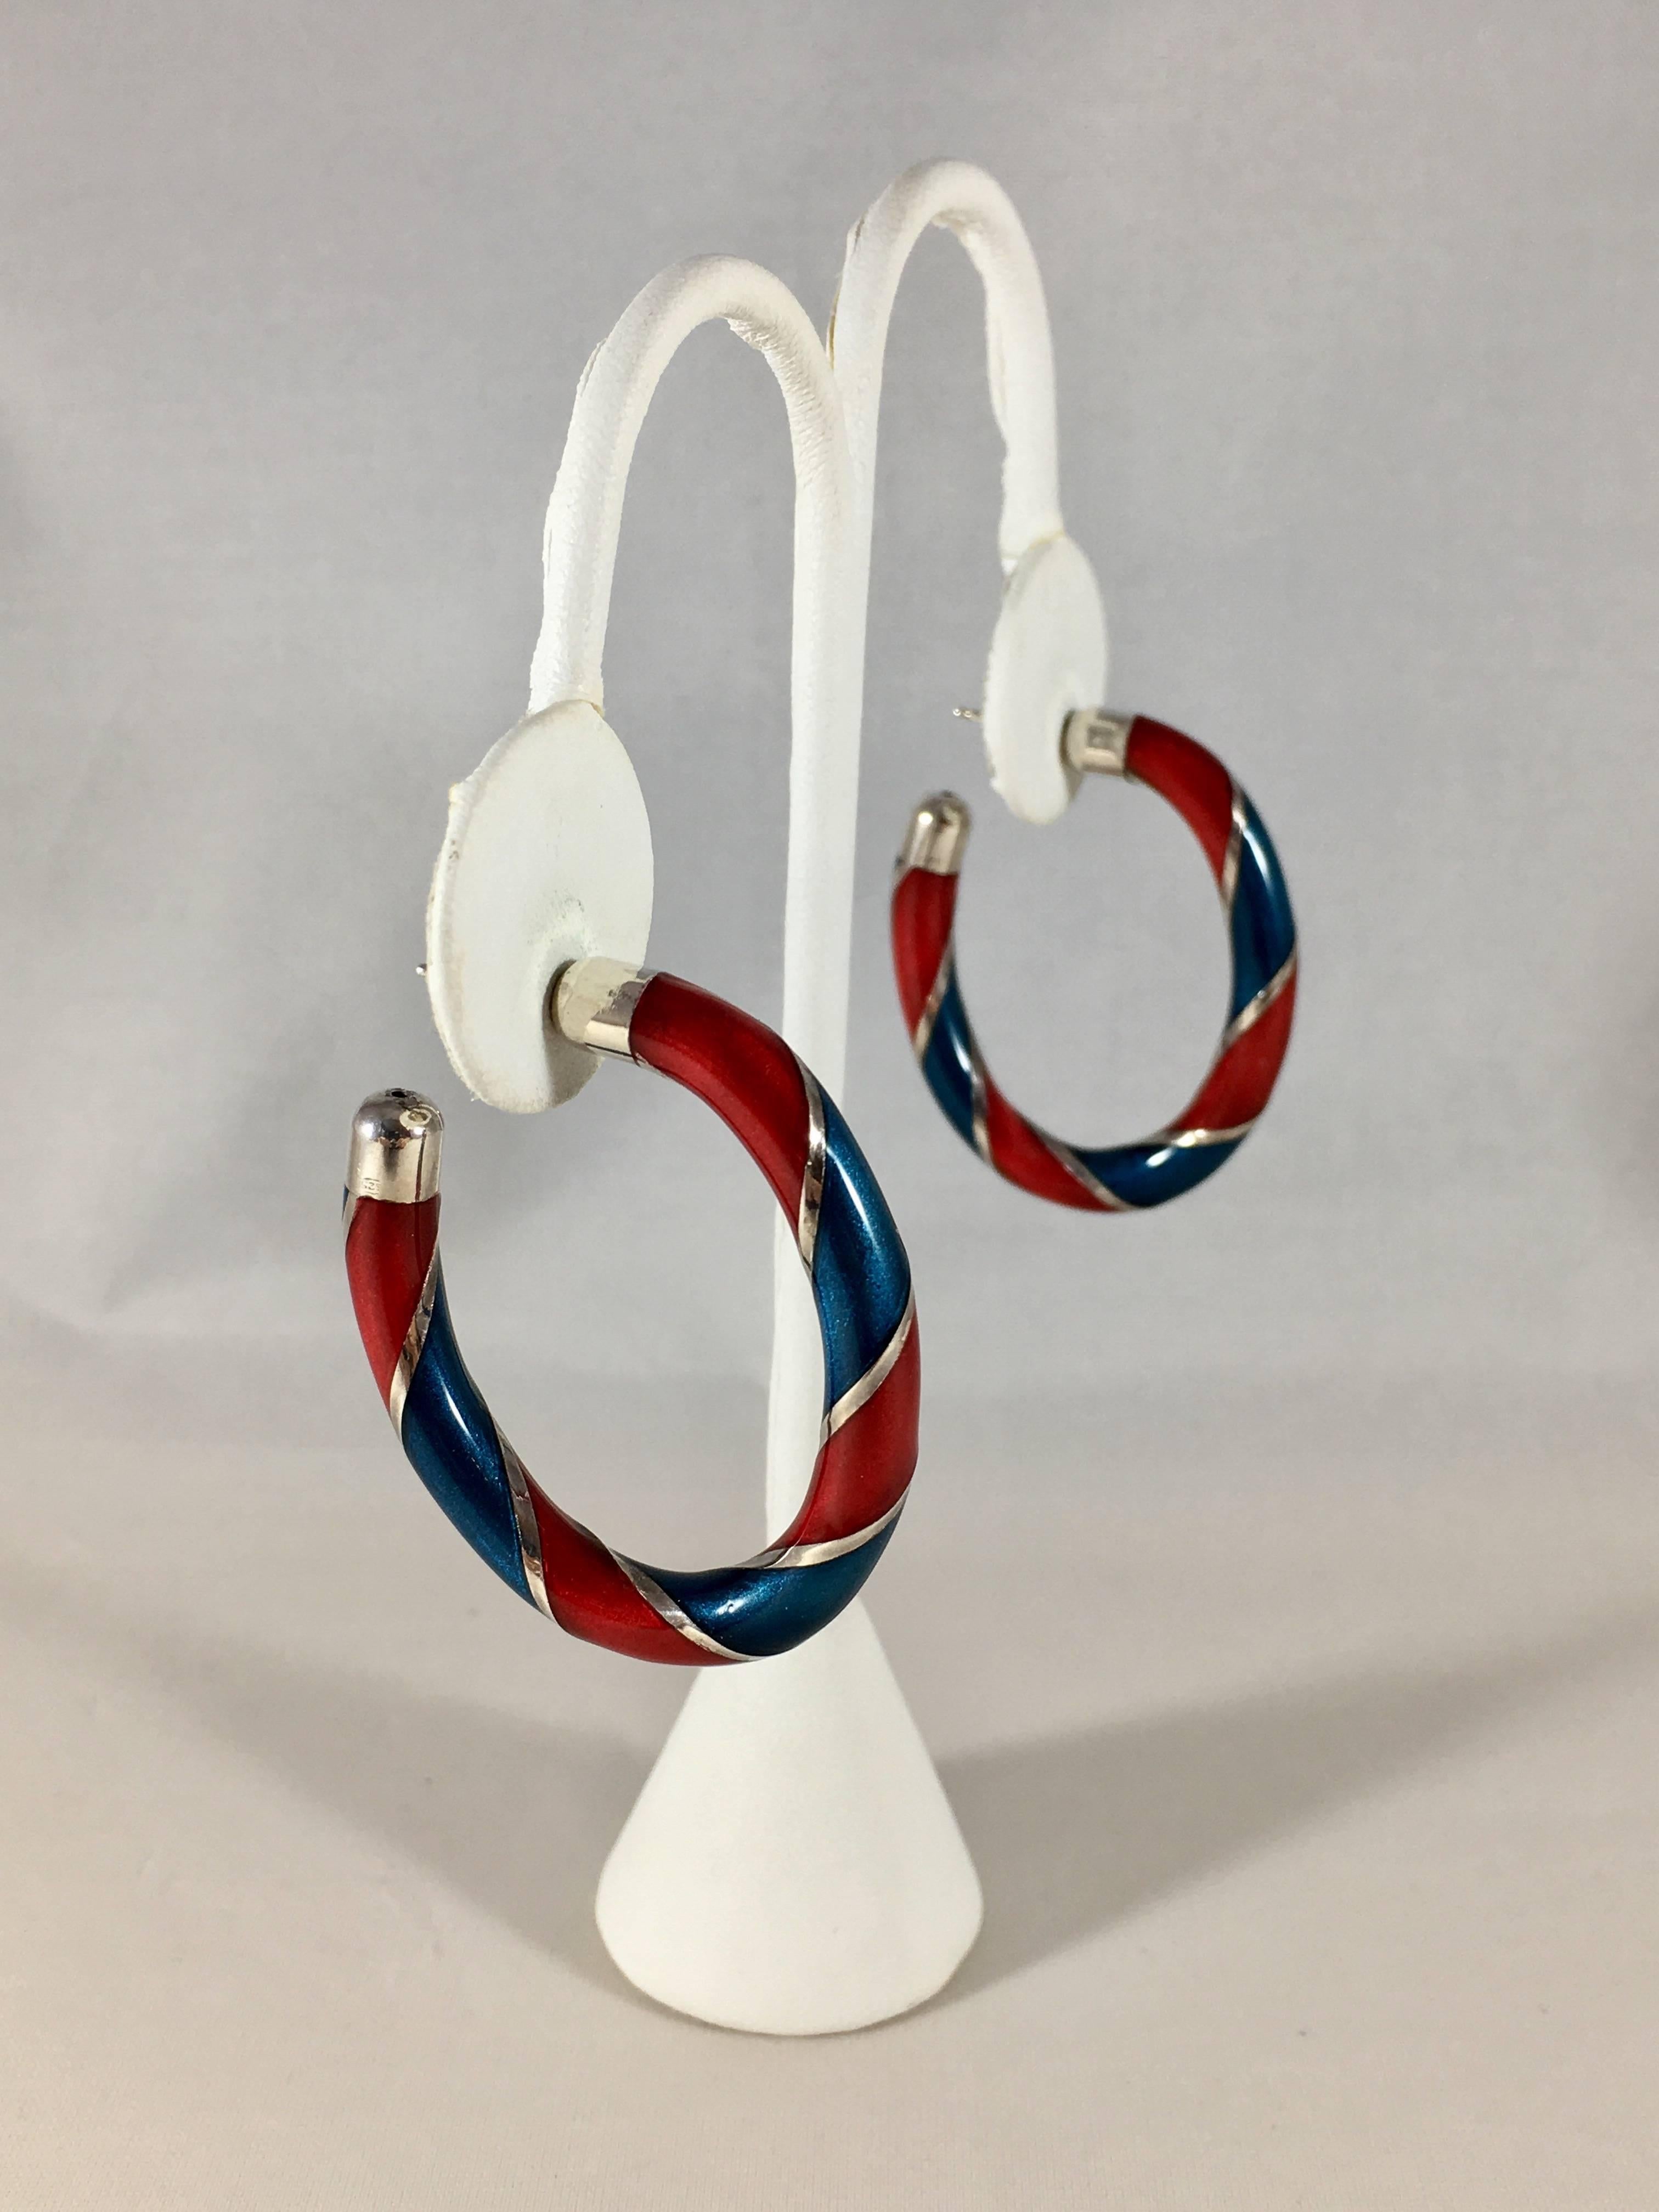 These are an amazing 1970s sterling silver and enamel pair of Gucci hoop earrings. They are striped with red and blue enamel over silver. They measure    1 5/8 inches long x 1 3/8 inches wide. The width is 3/16 inches. The earrings are in excellent